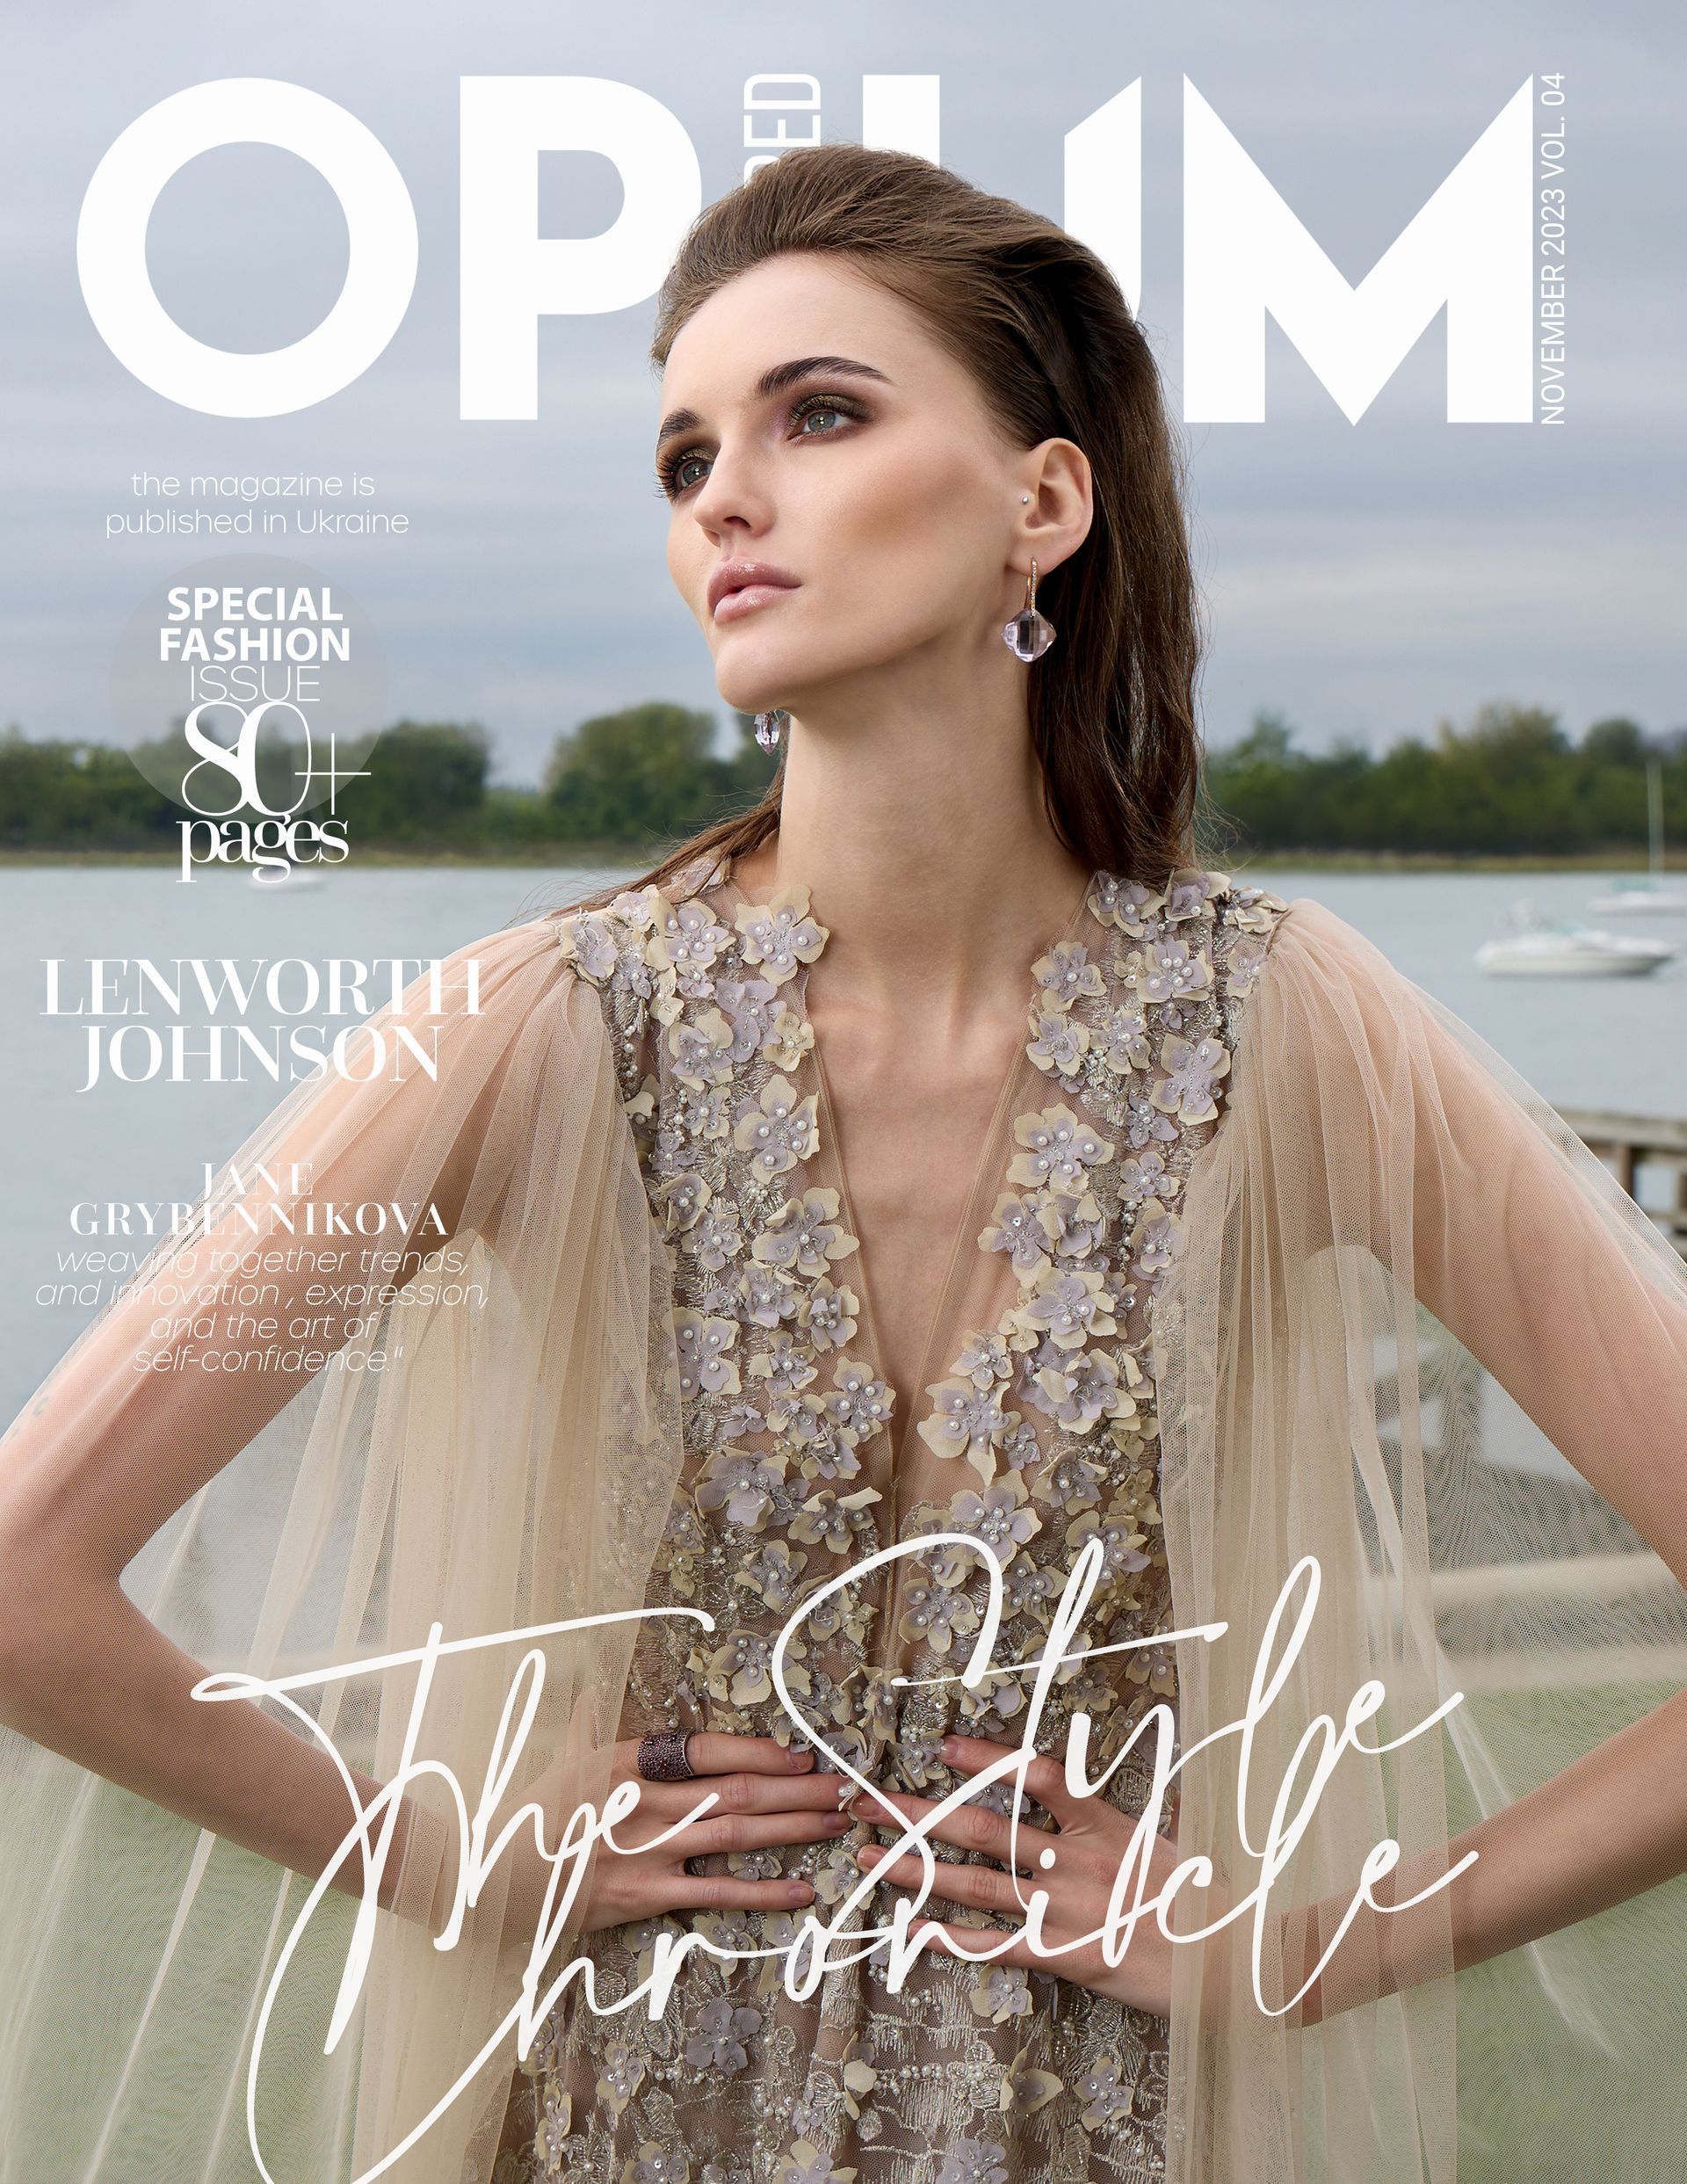 Opum red magazine cover with international top model.